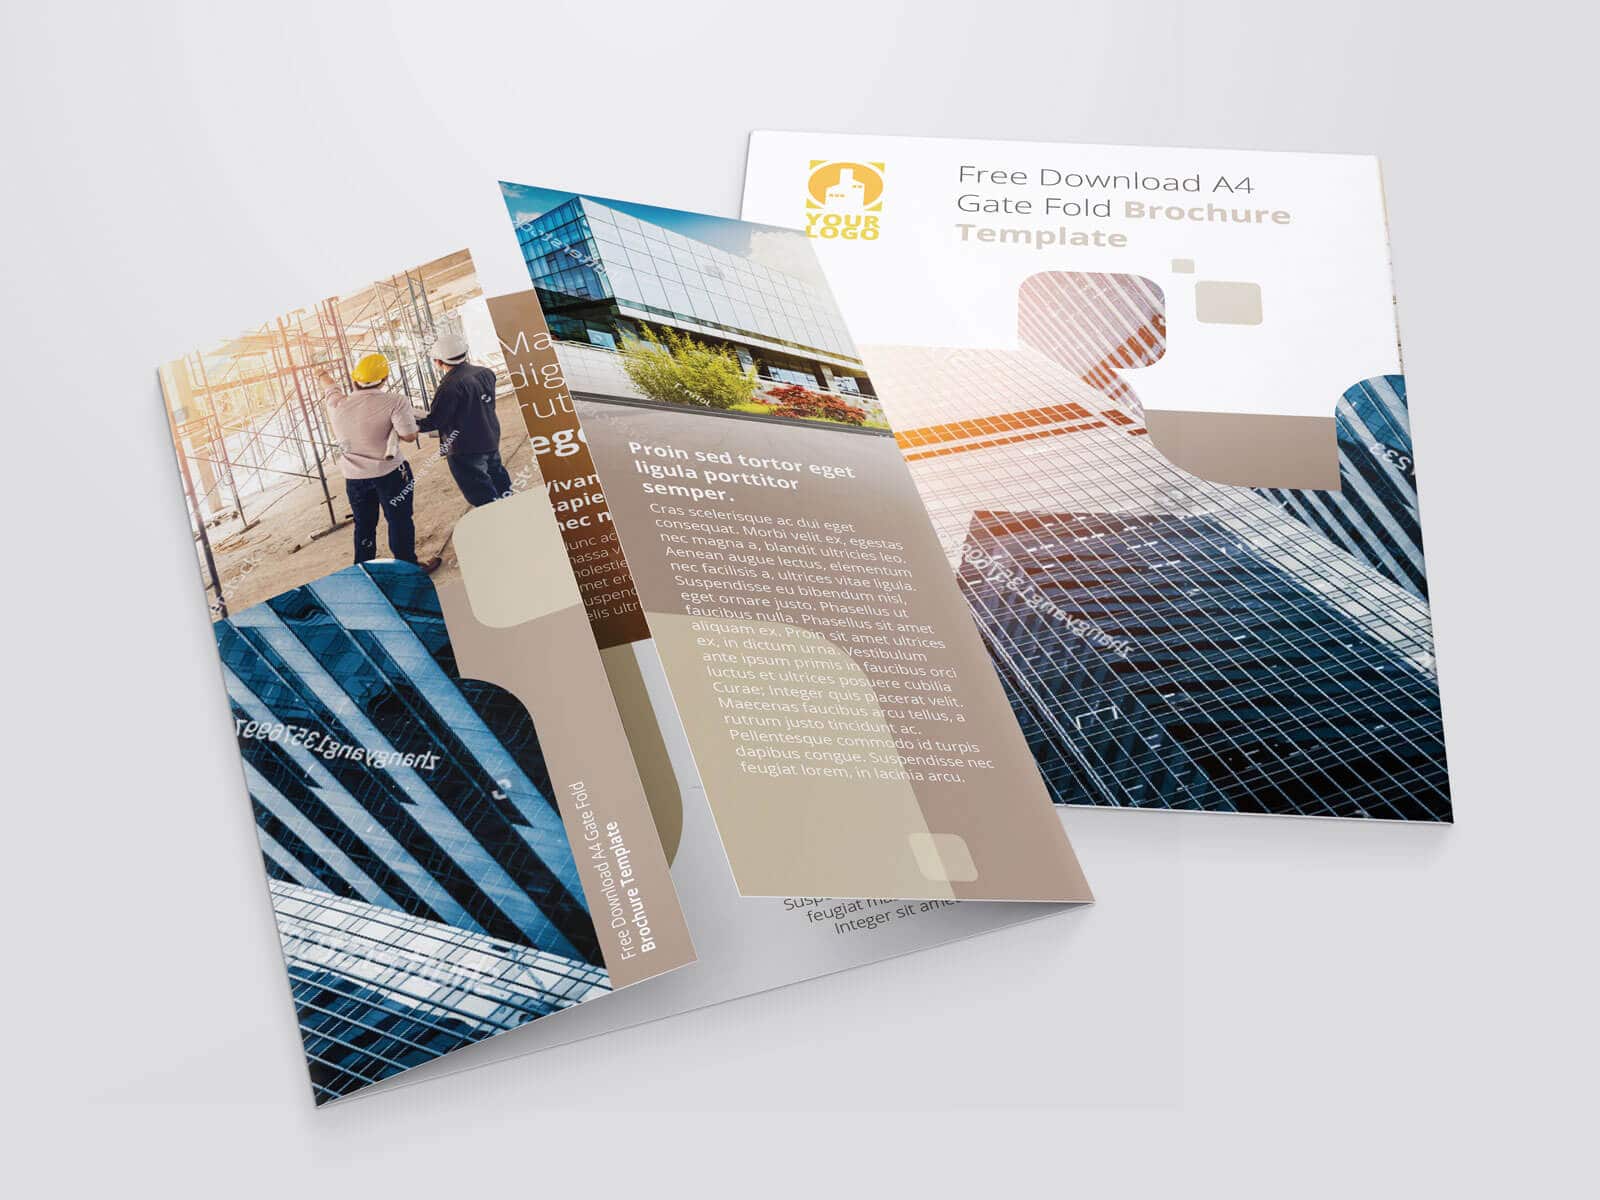 Free Download A4 Gate Fold Brochure Template